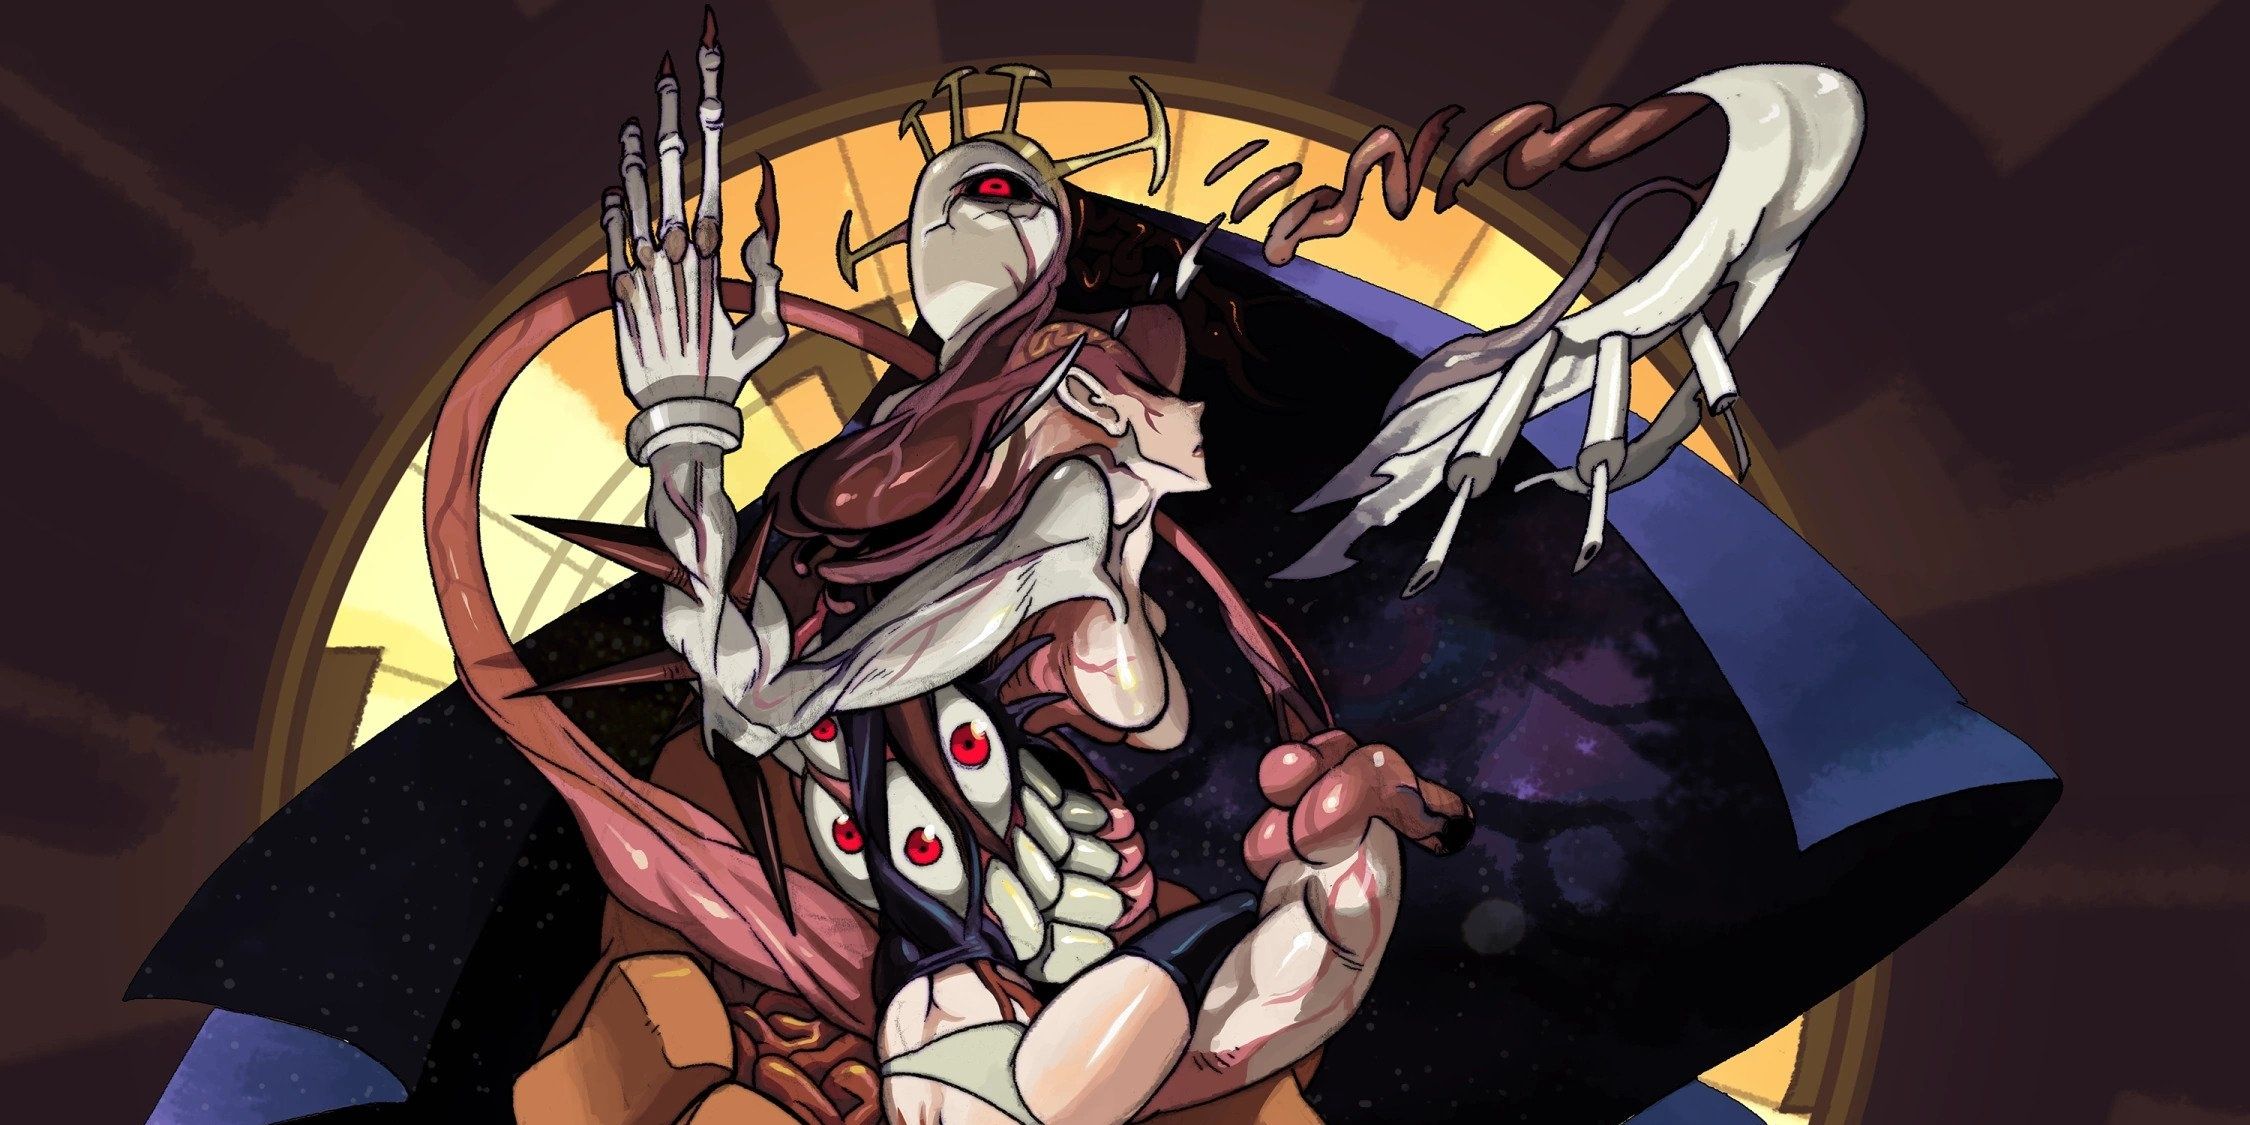 Double from Skullgirls as an form of eyes, bones and muscles all together against a dark background with a yellow circle at the center